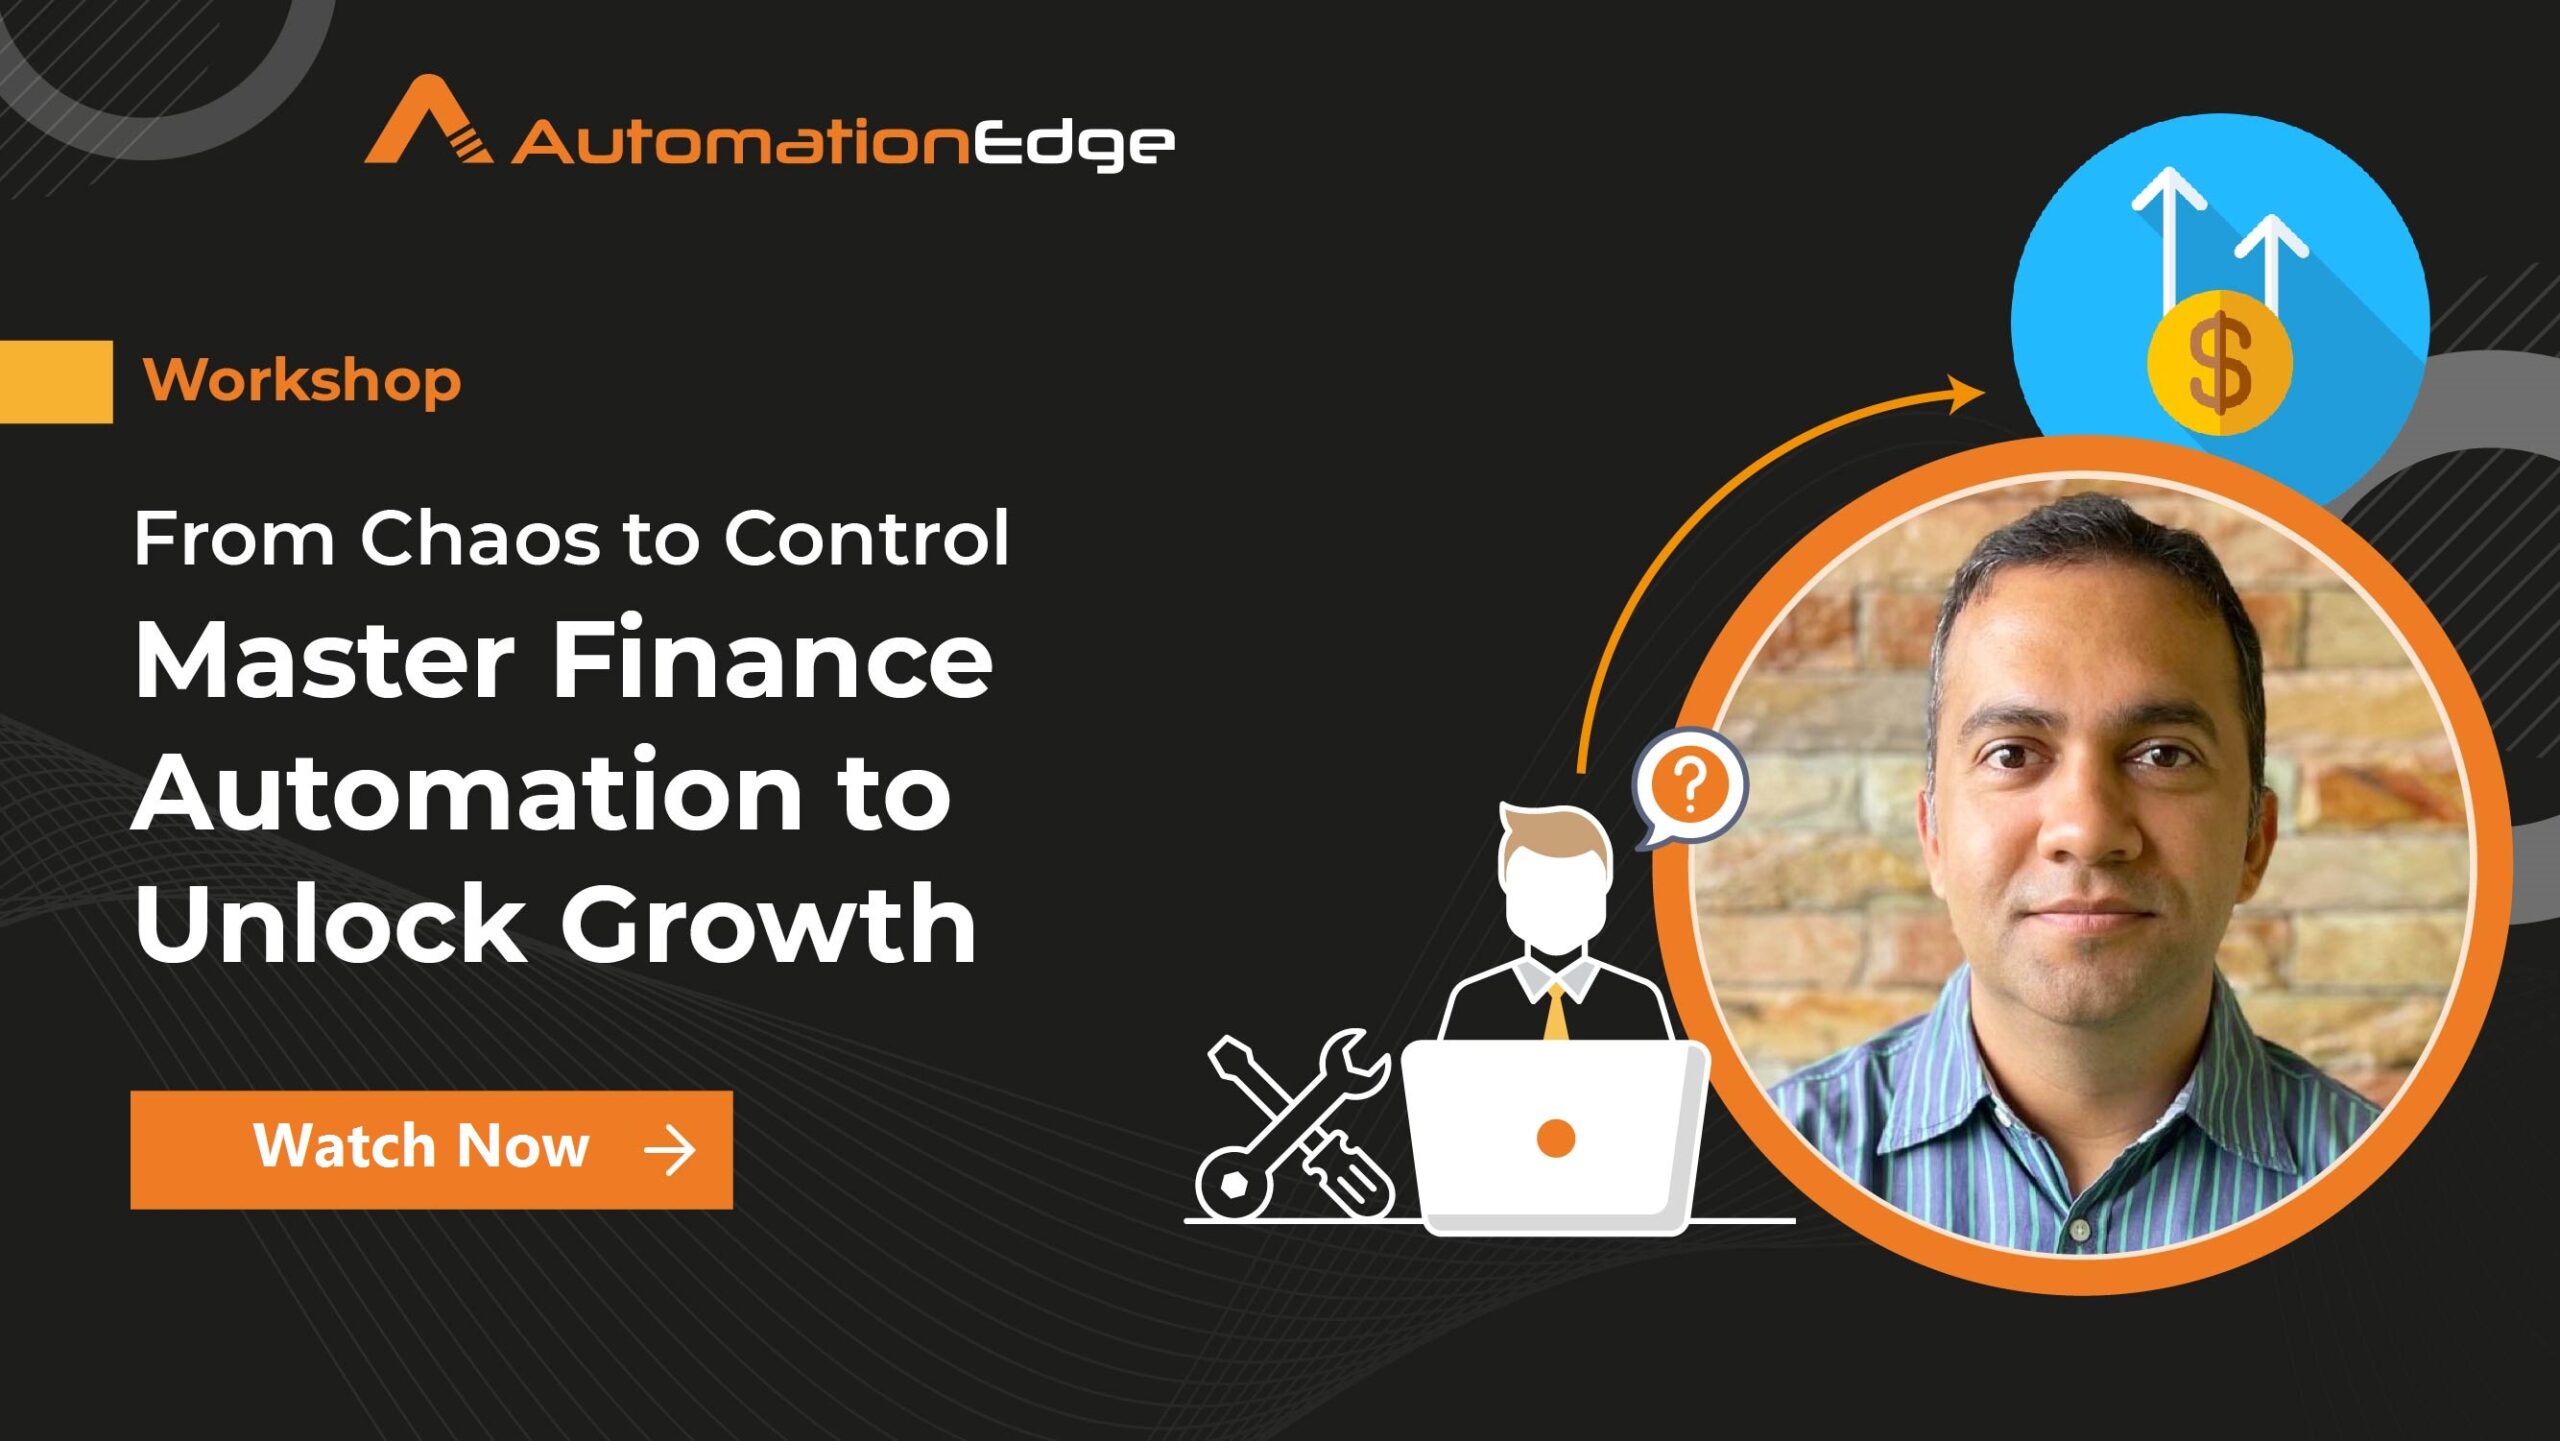 https://automationedge.com/workshop/from-chaos-to-control-mastering-finance-automation-to-unlock-growth/